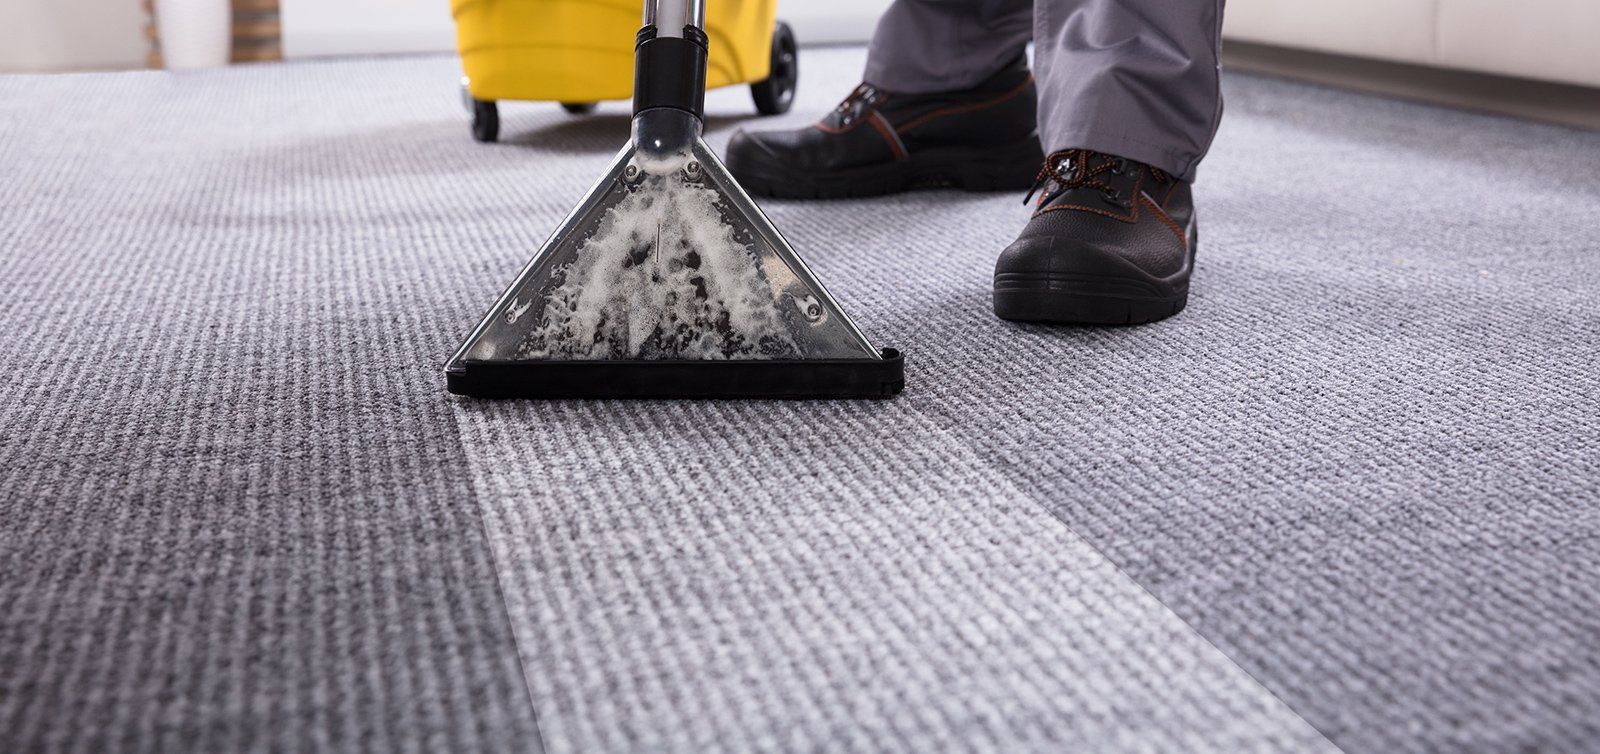 Cleaning a carpet using vacuum